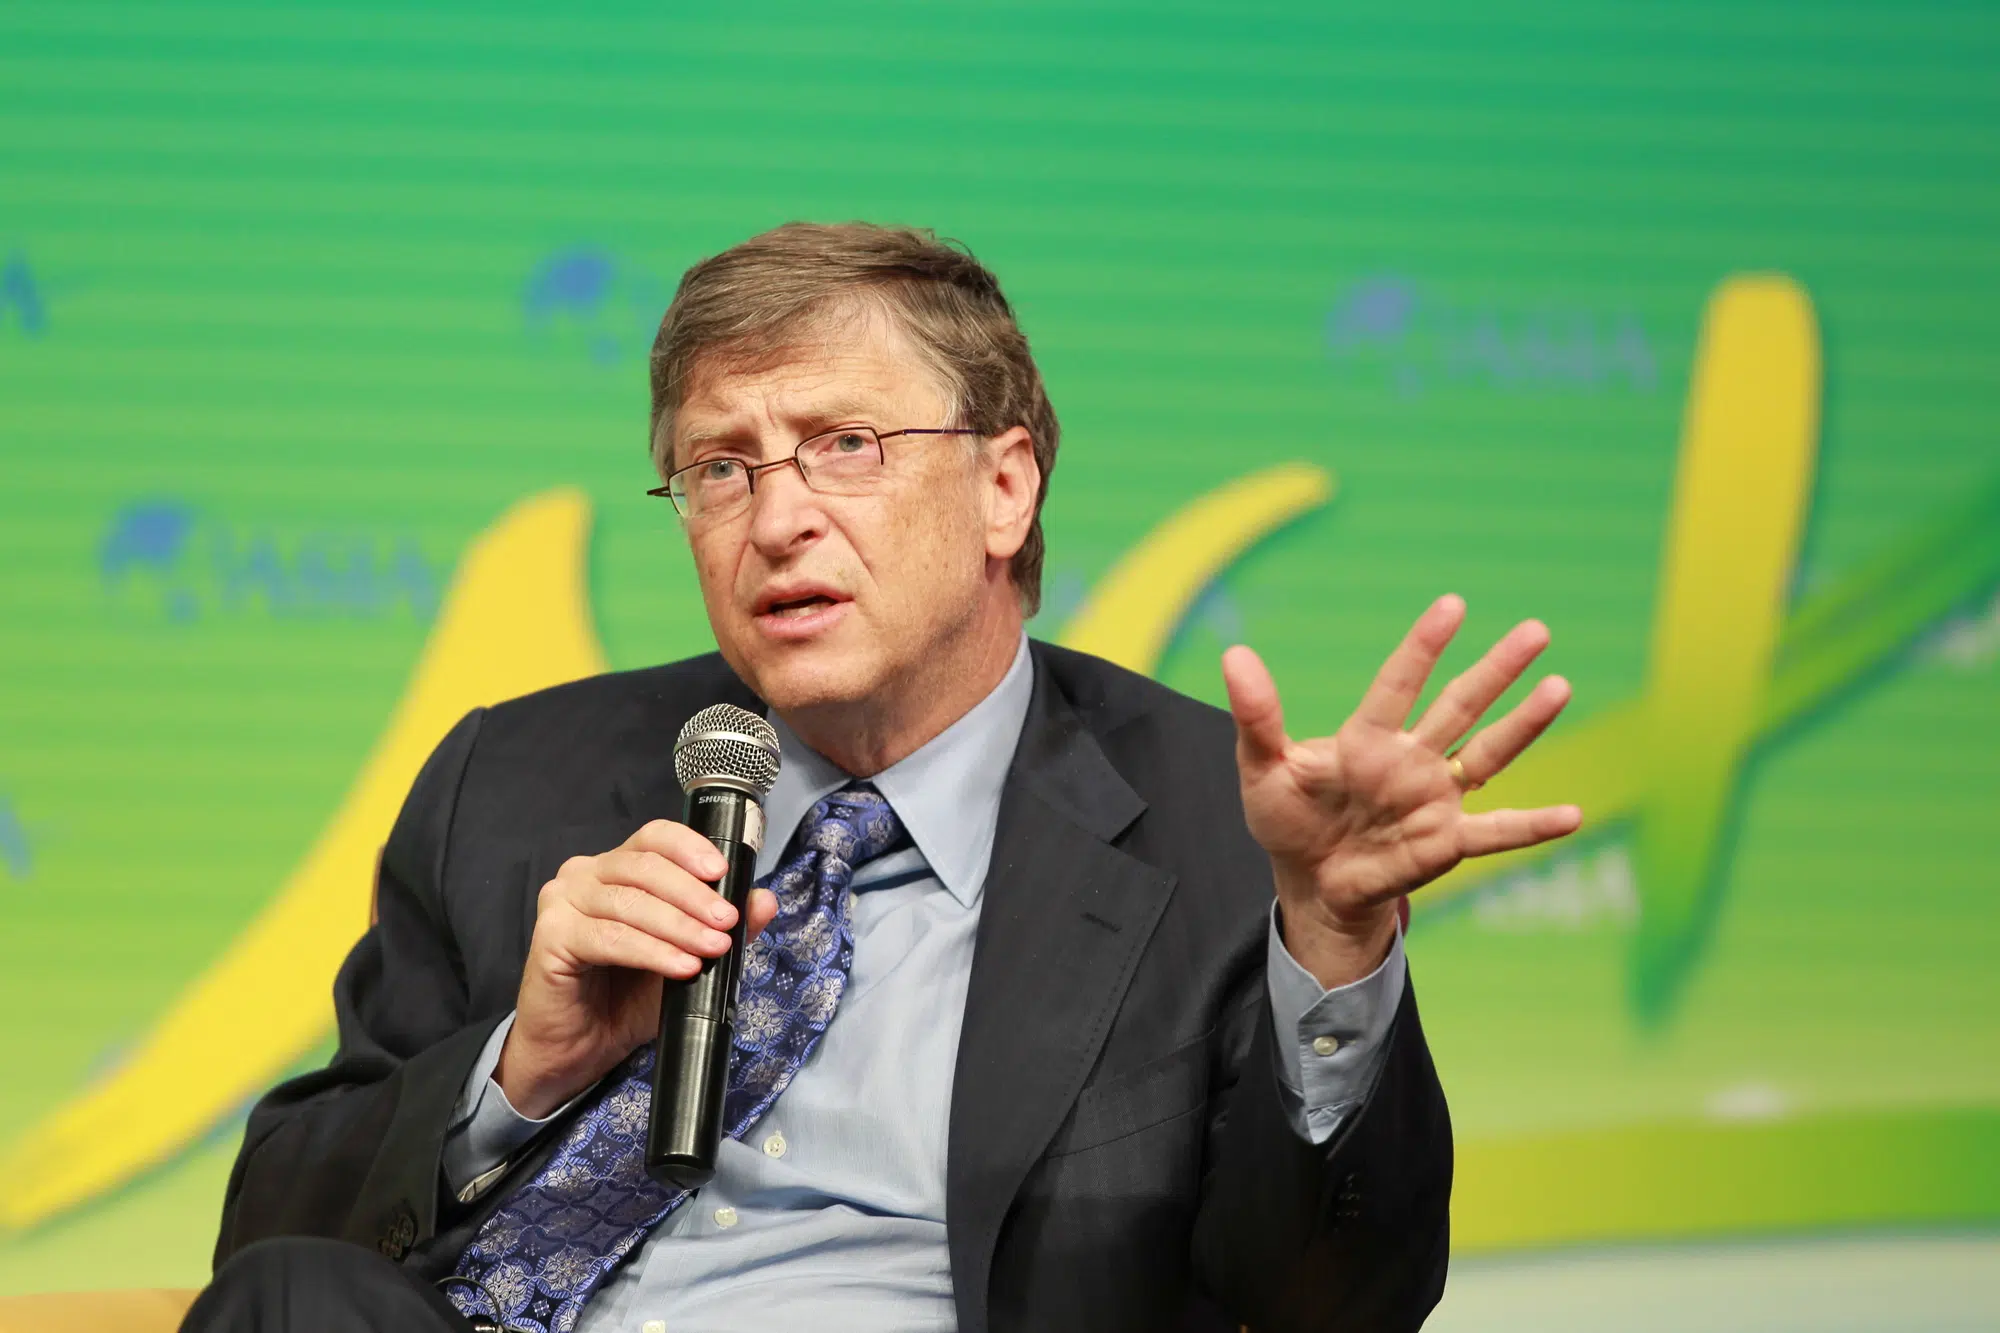 Dialogue with Bill Gates: Investment for the poor